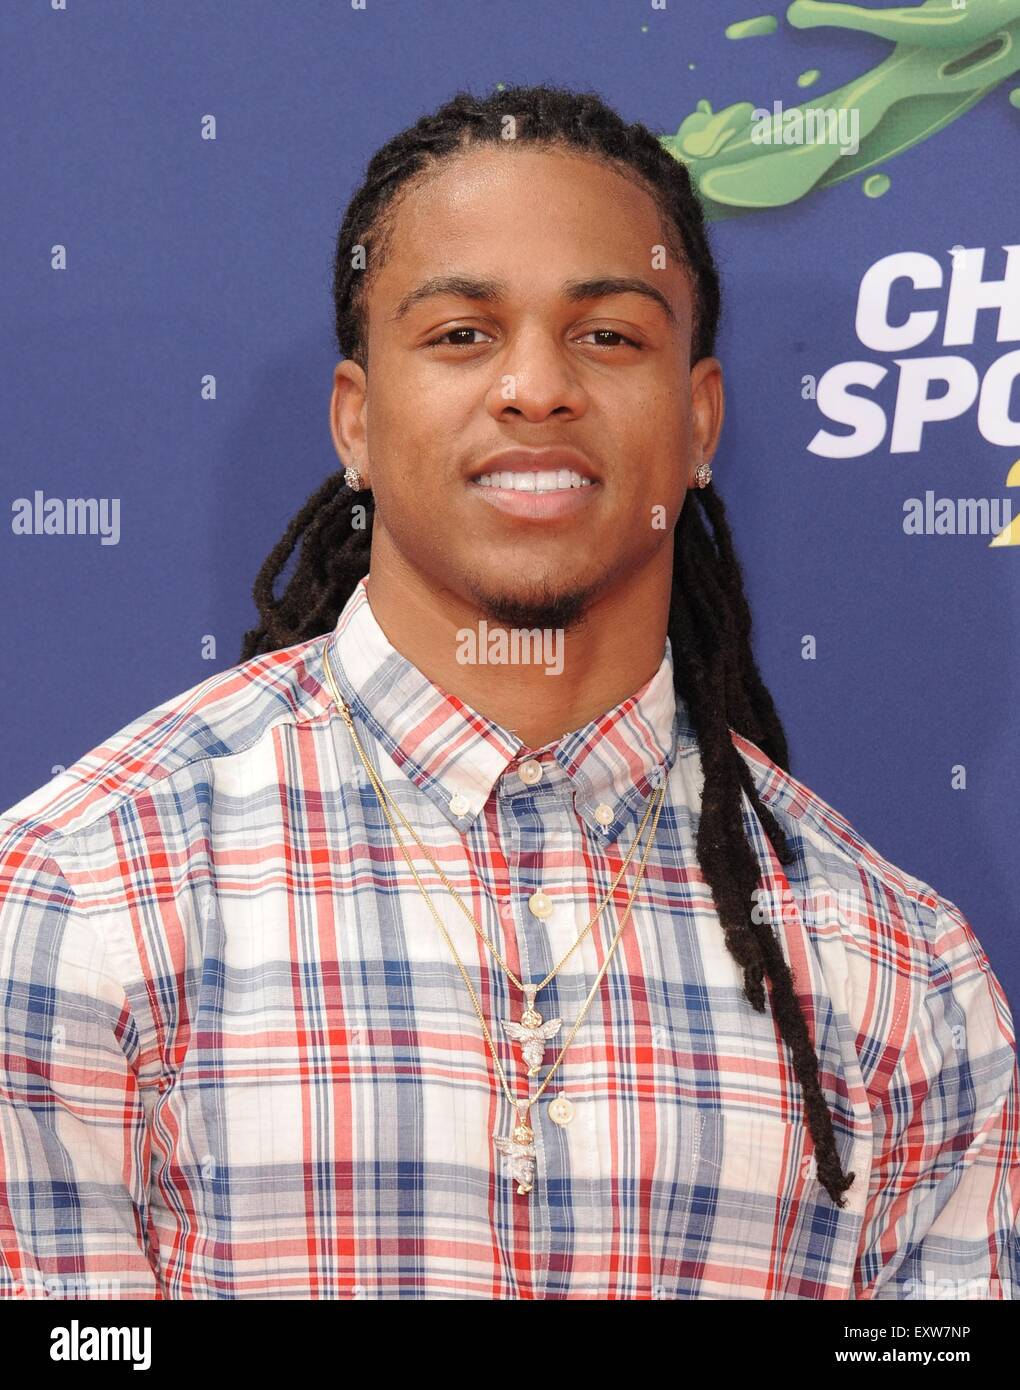 Los Angeles, California, USA. 16th July, 2015. Jason Verrett at arrivals for Nickelodeon Kids' Choice Sports Awards, Pauley Pavilion July 16, 2015. Credit:  Dee Cercone/Everett Collection/Alamy Live News Stock Photo